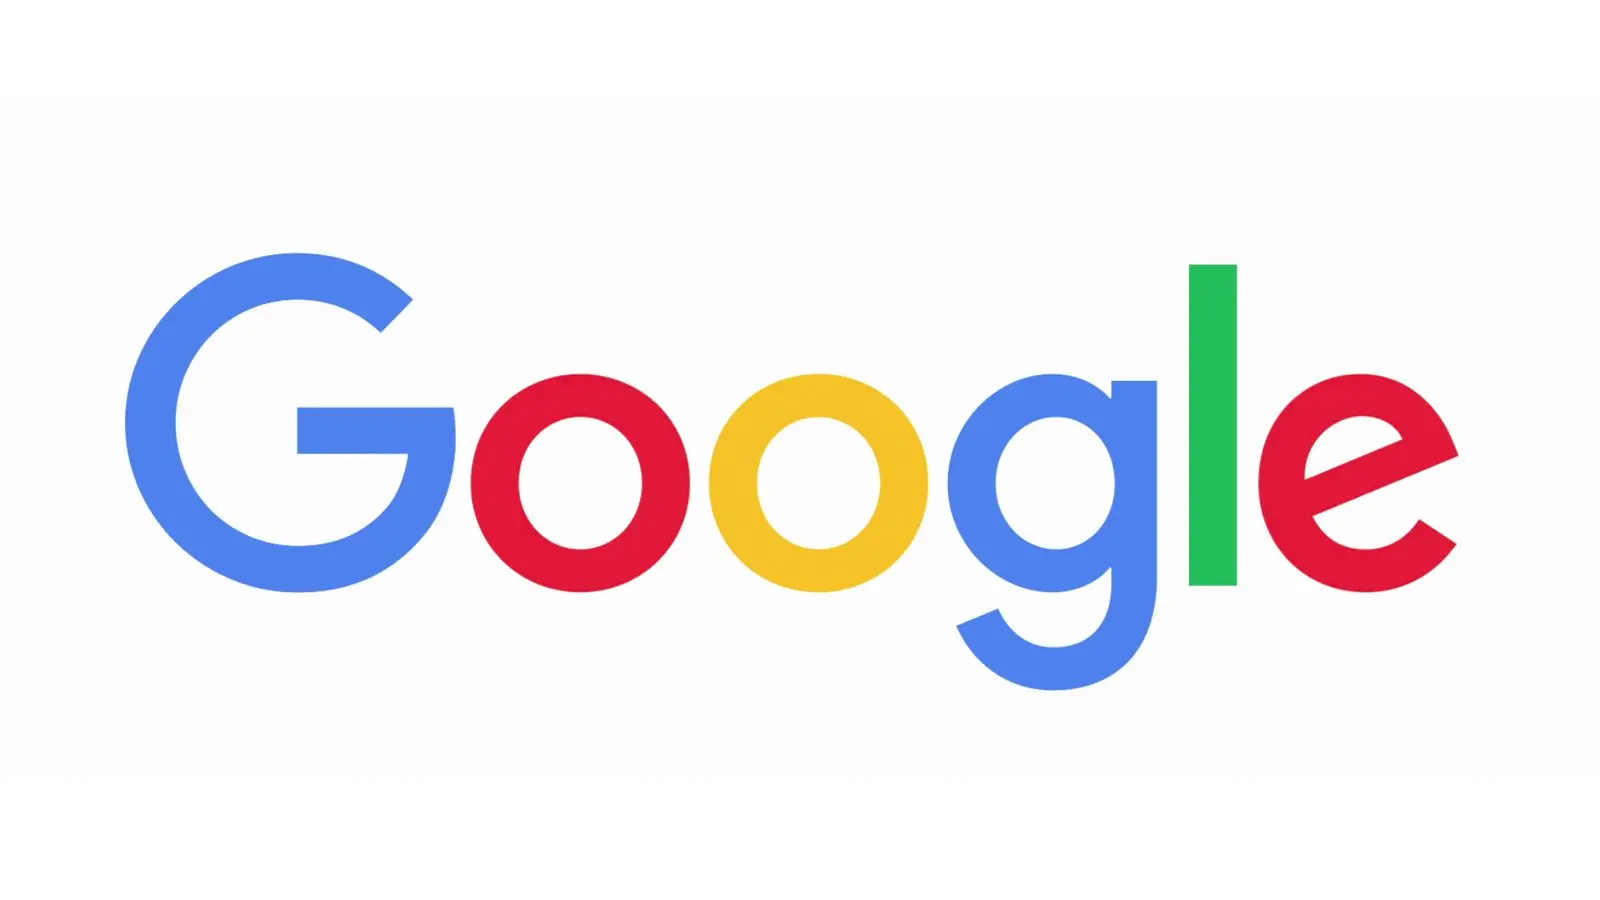 The google logo is shown on a white background.